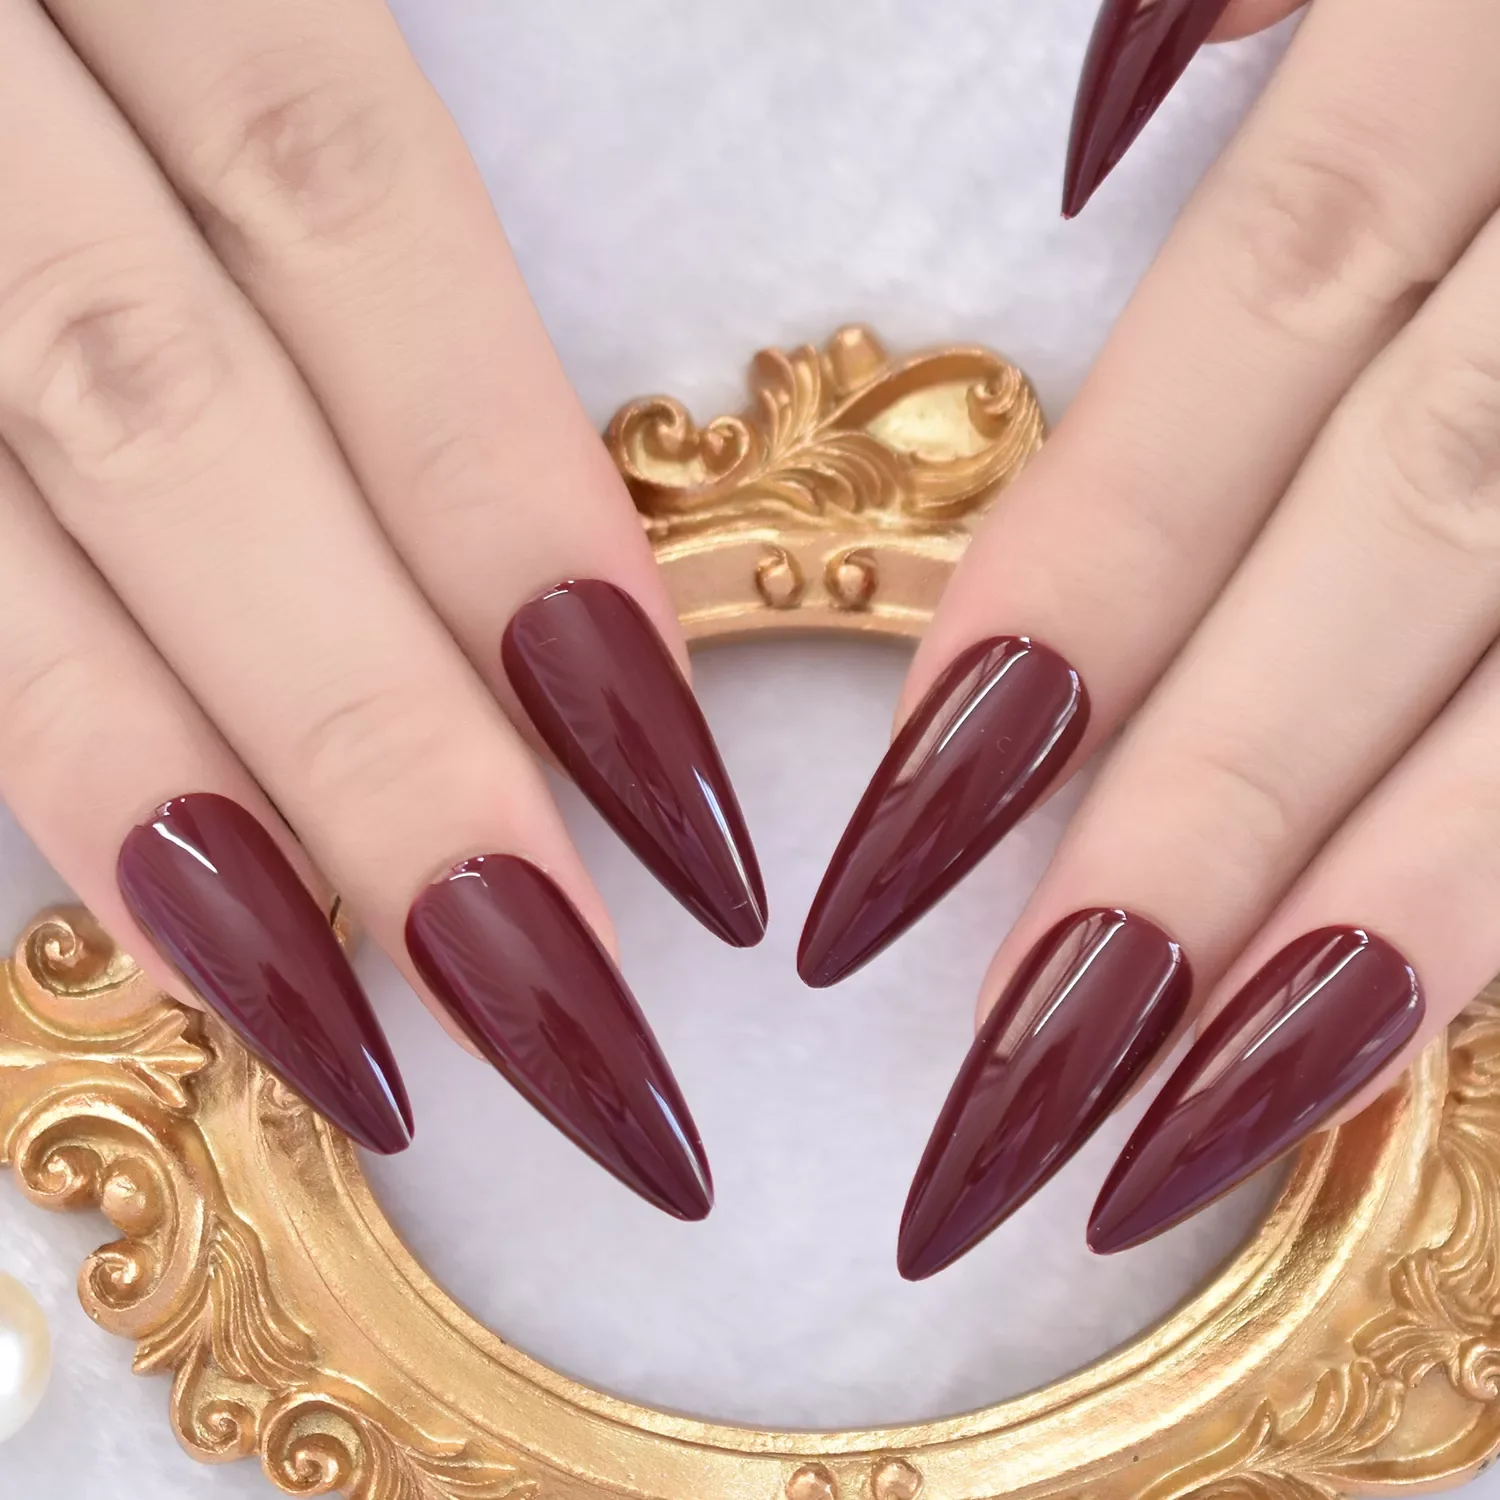 

Maroon Red Gel Fantasy False Nails Almond Pointed Dark Sexy False Nails Medium Long Size Stiletto Tips with Glue Sticker